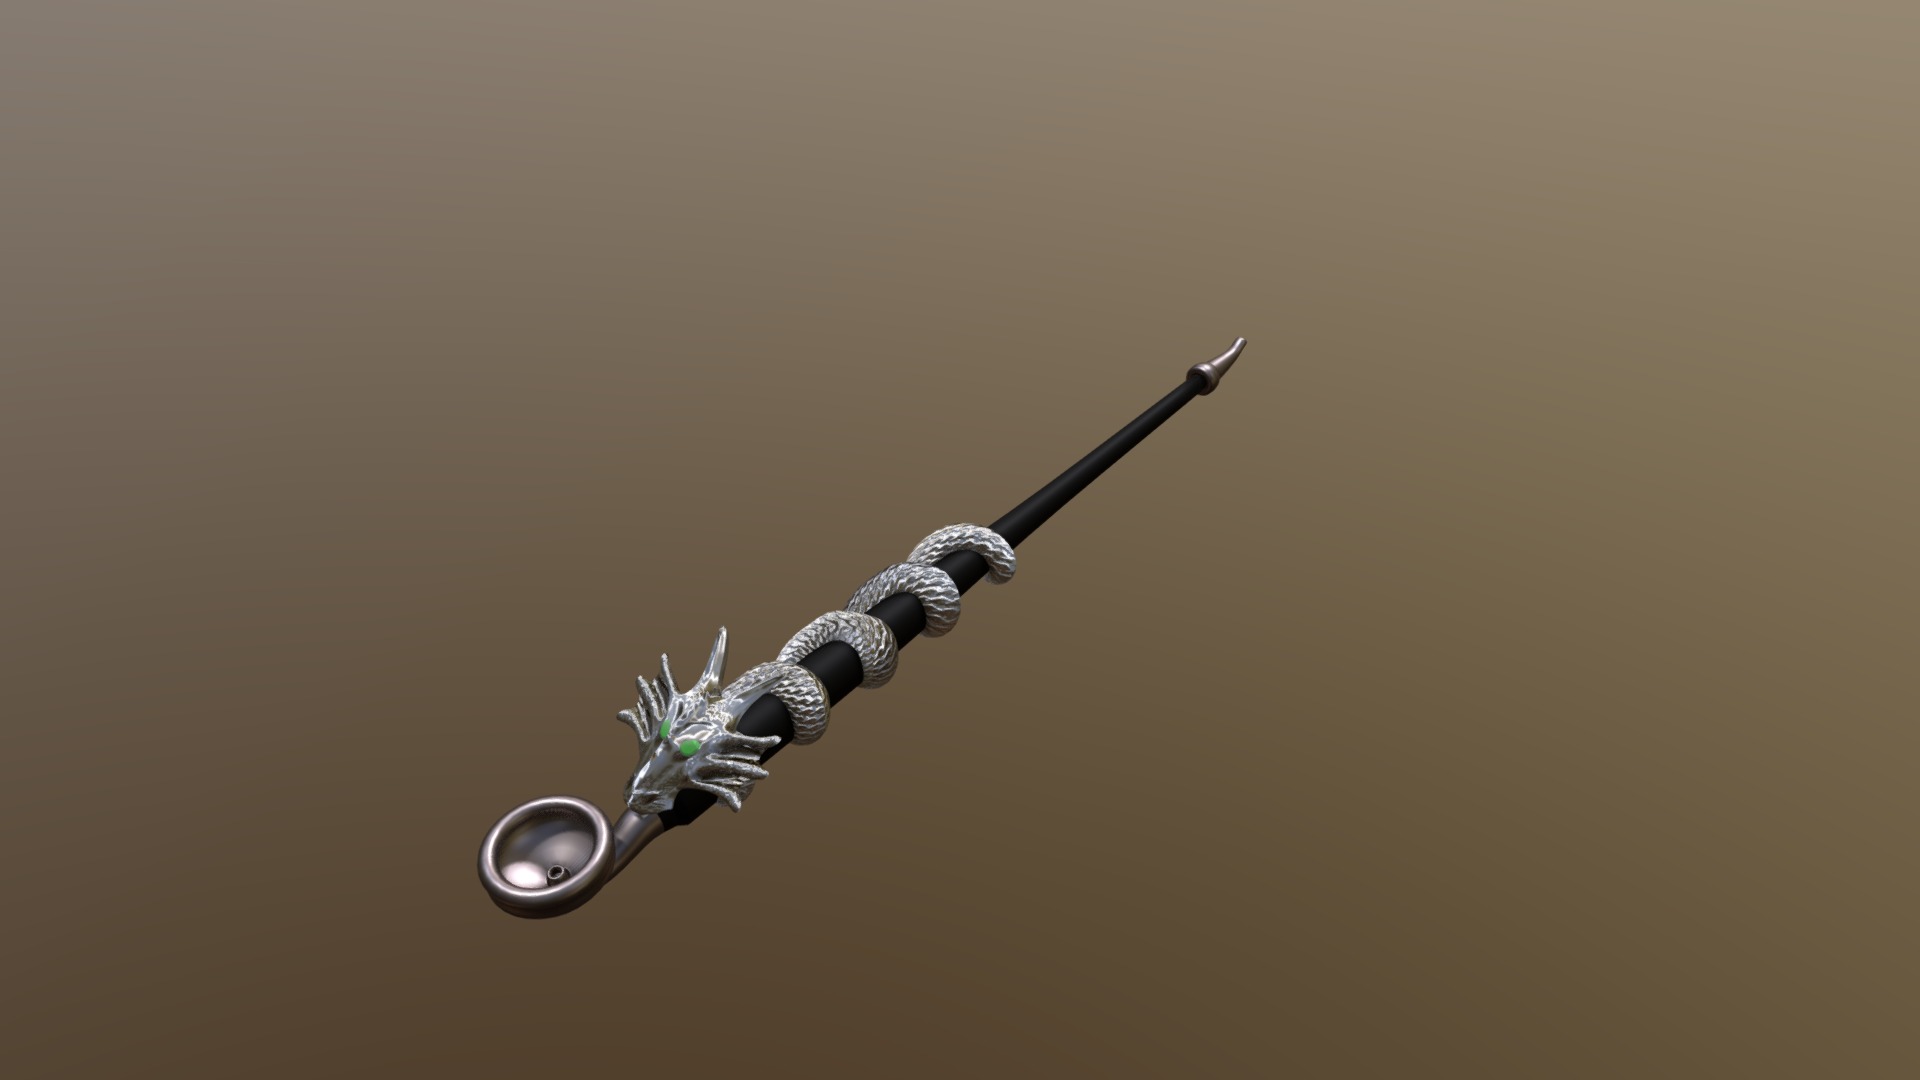 A simple Smoking Pipe with dragon shape. Creted in January 2018, edited June 2019.

Extra stuff:
https://www.3dxo.com/textures/4924_reptil_skin_1 - Dragon Smoking Pipe - 3D model by vinnytells 3d model